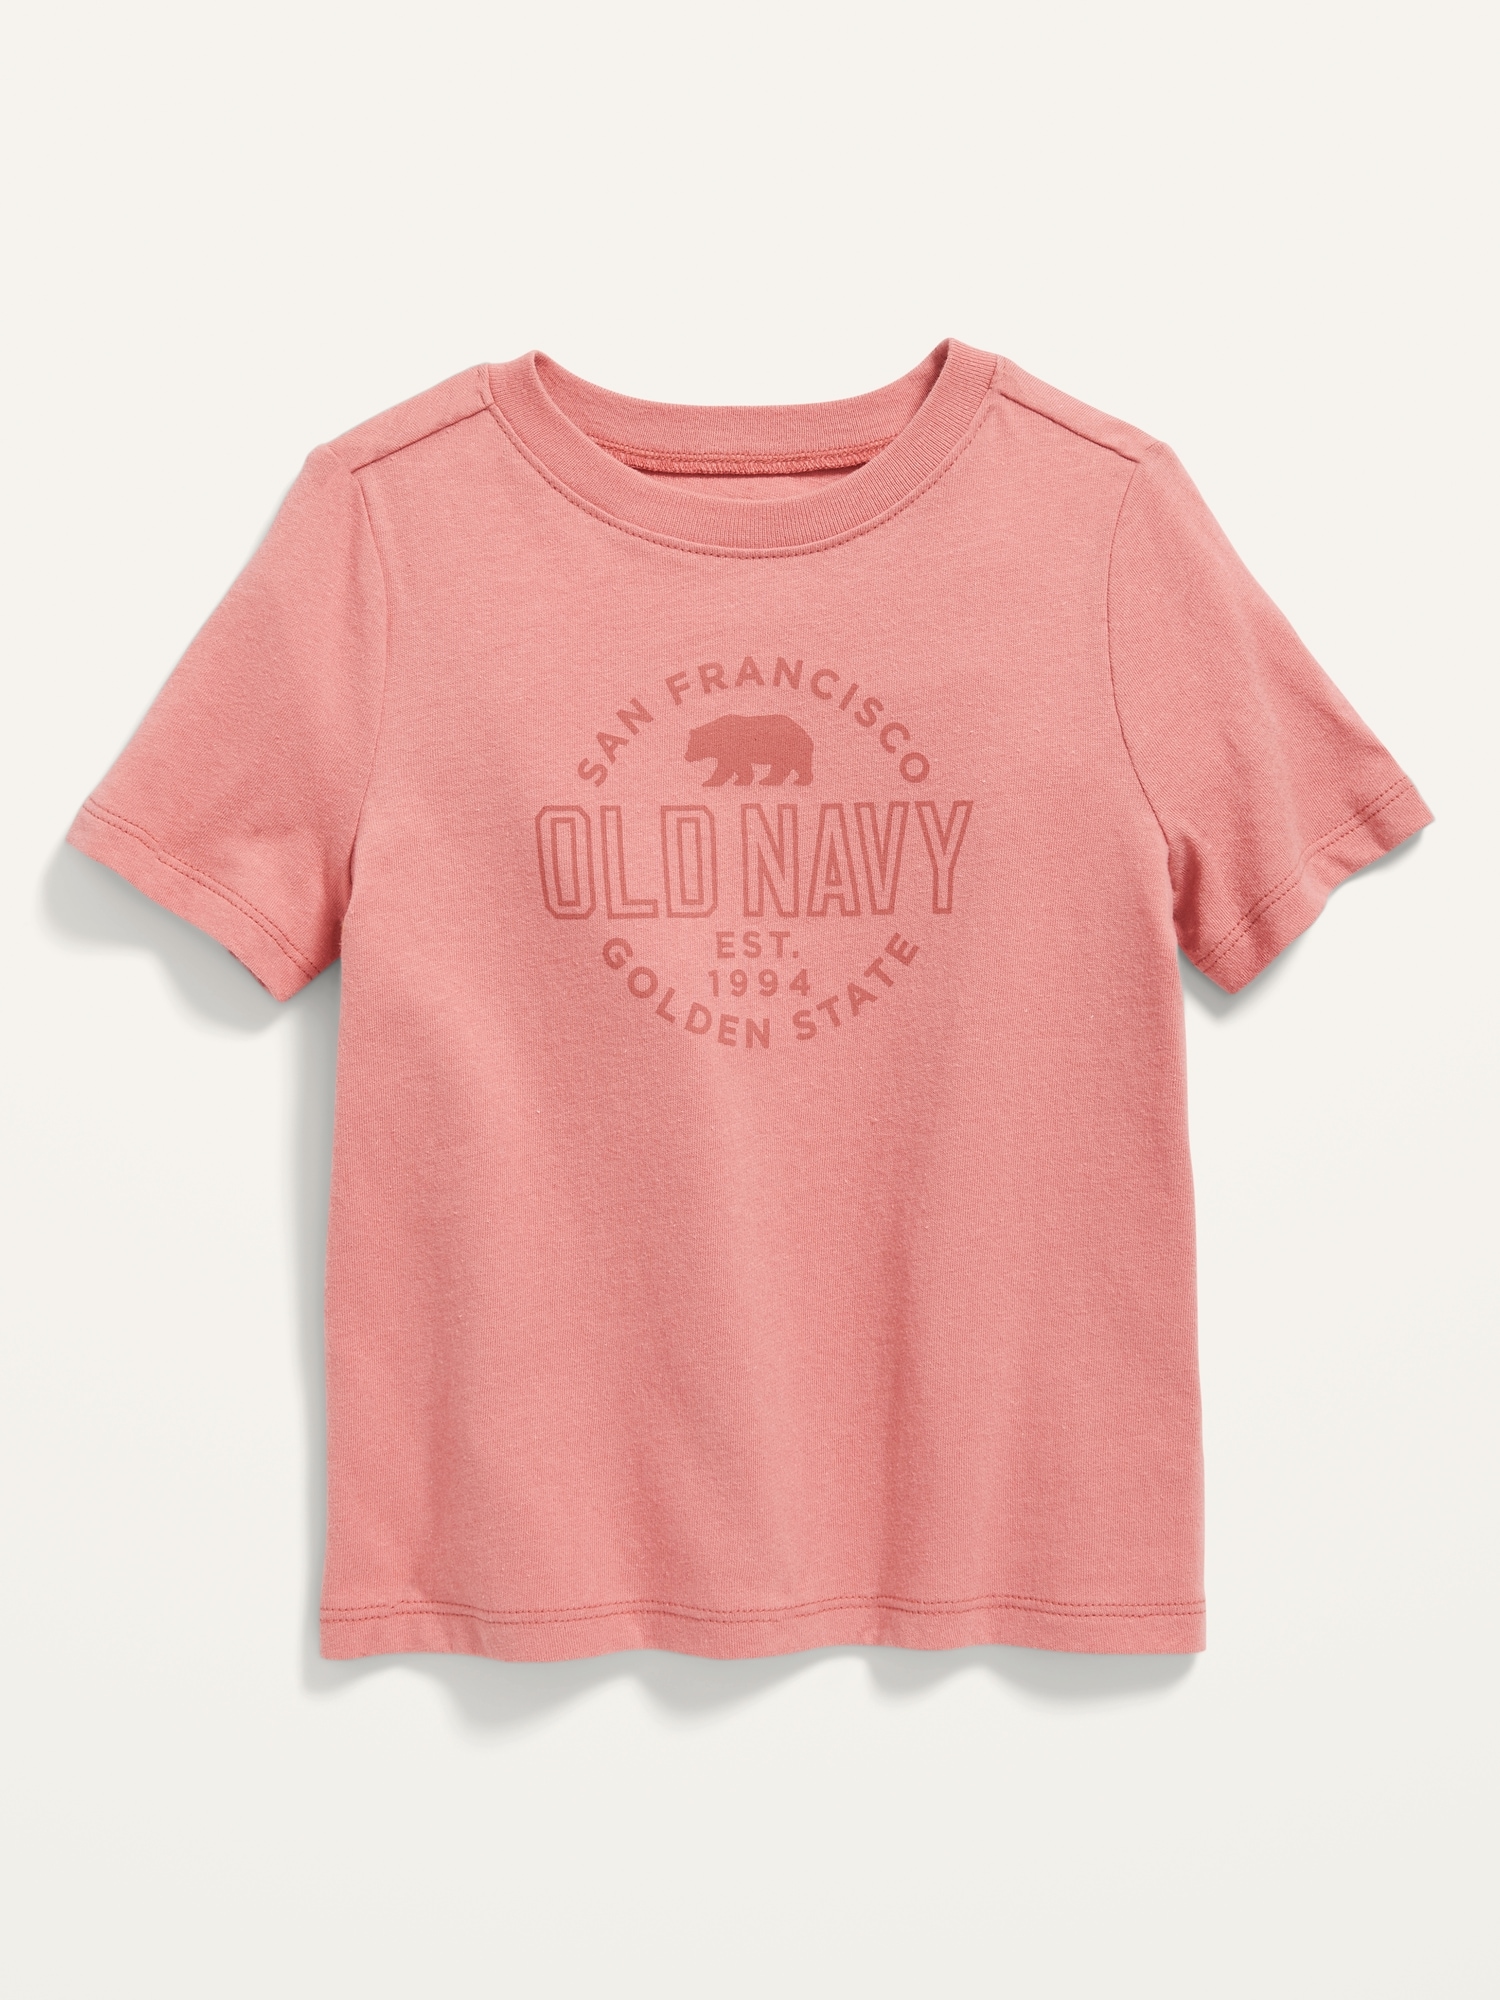 Unisex Logo-Graphic Tee for Toddler